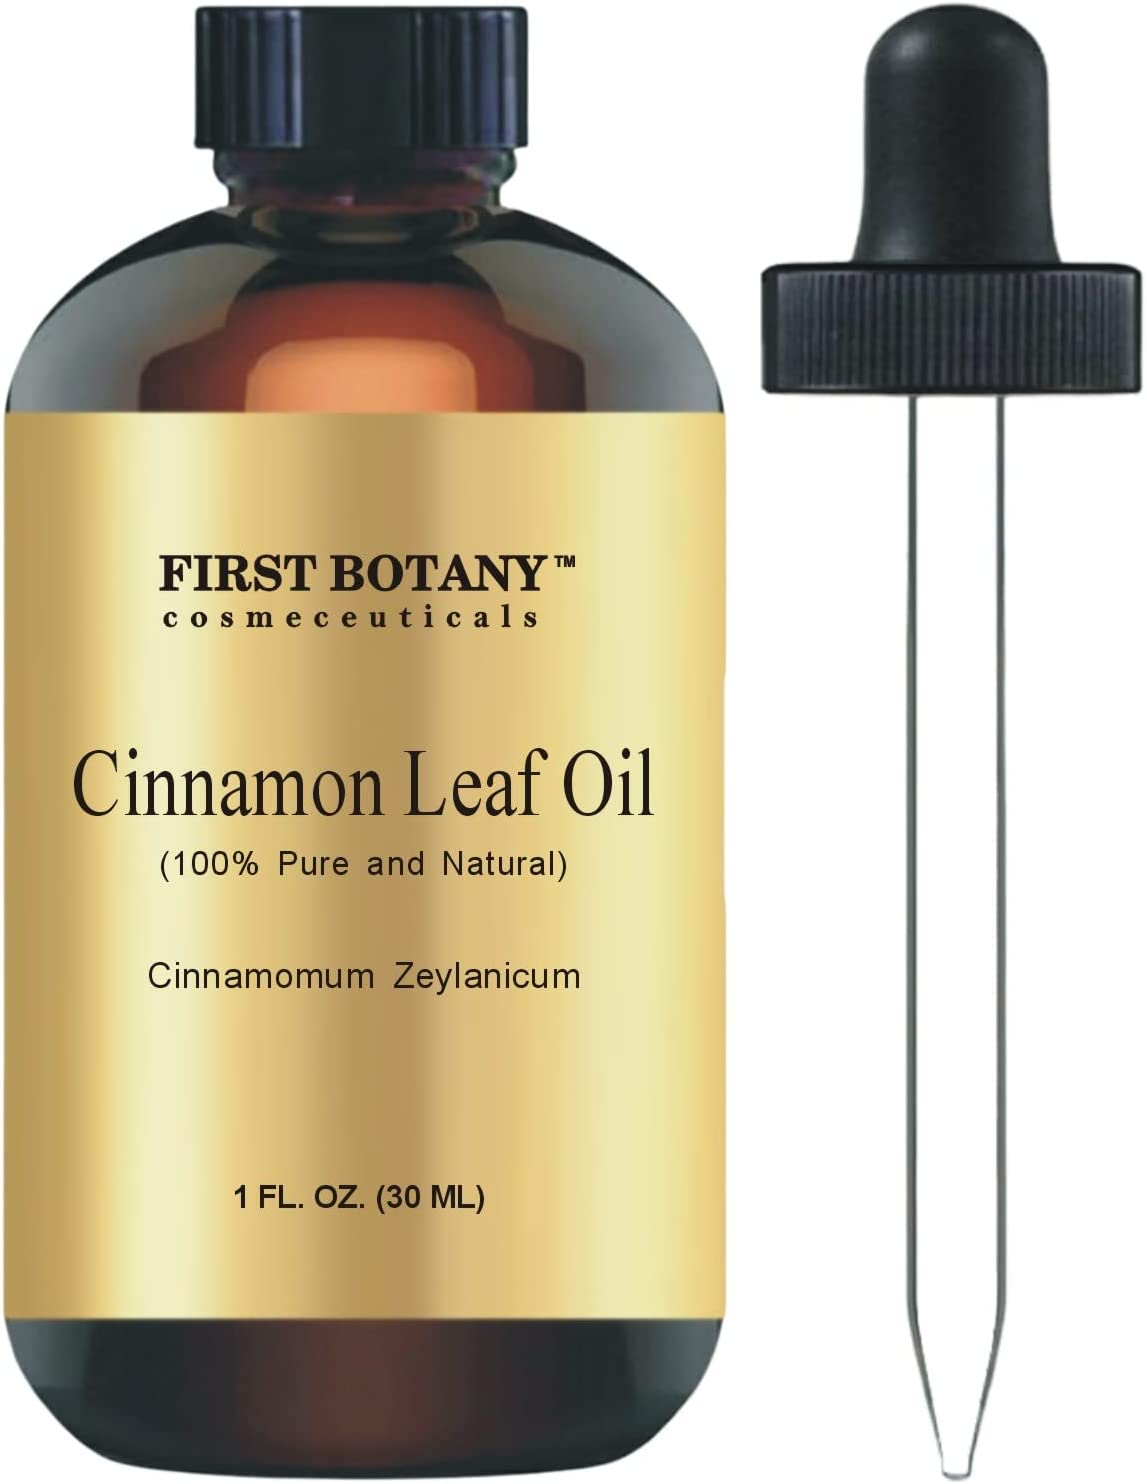 First Botany 100% Pure Cinnamon Essential Oil - Premium Cinnamon Oil for Aromatherapy, Massage, Topical & Household Uses - 1 fl oz (cinnamon)